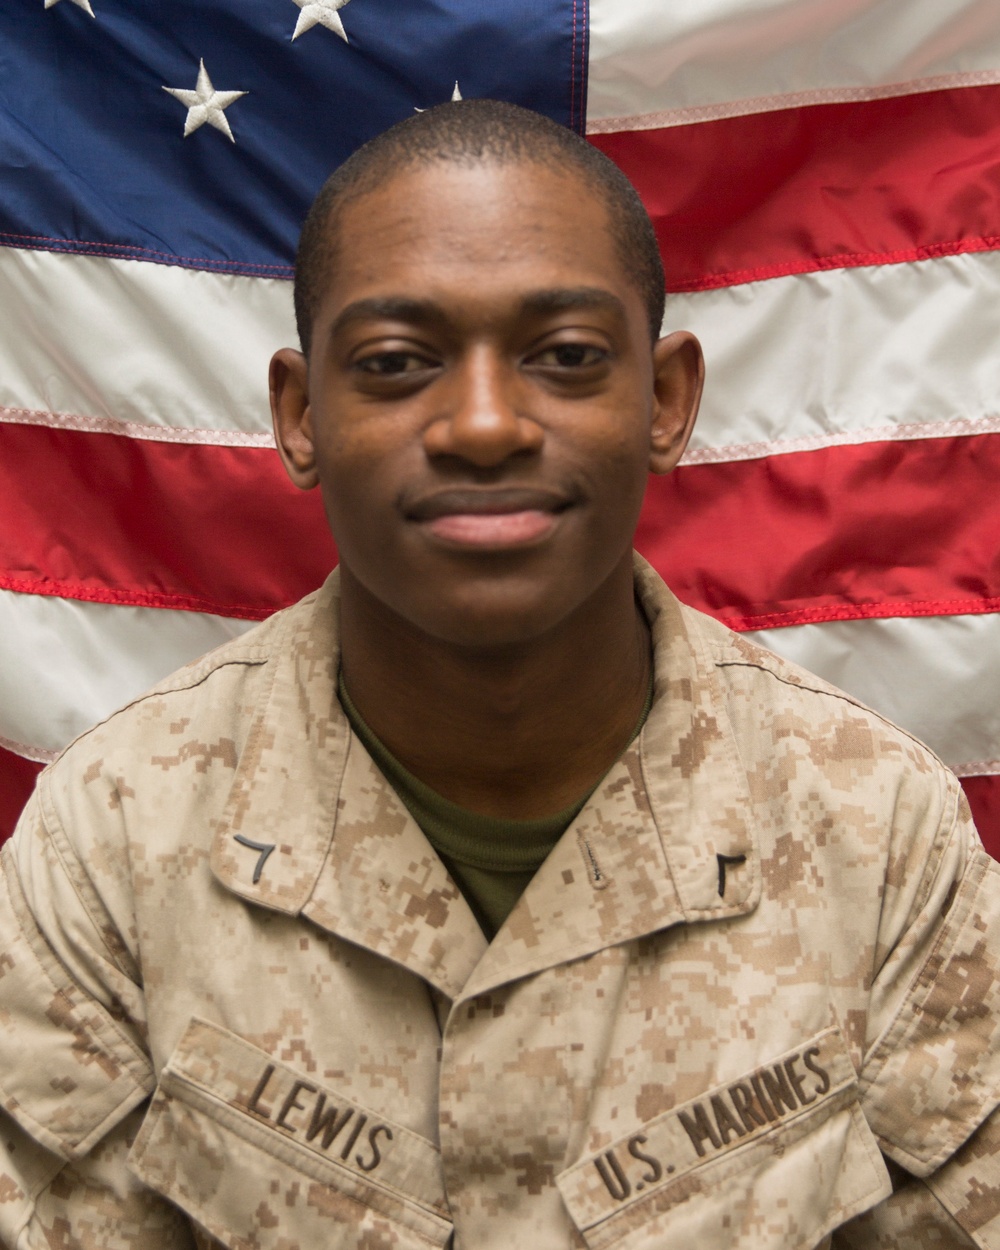 Ohio native serving with 24th MEU